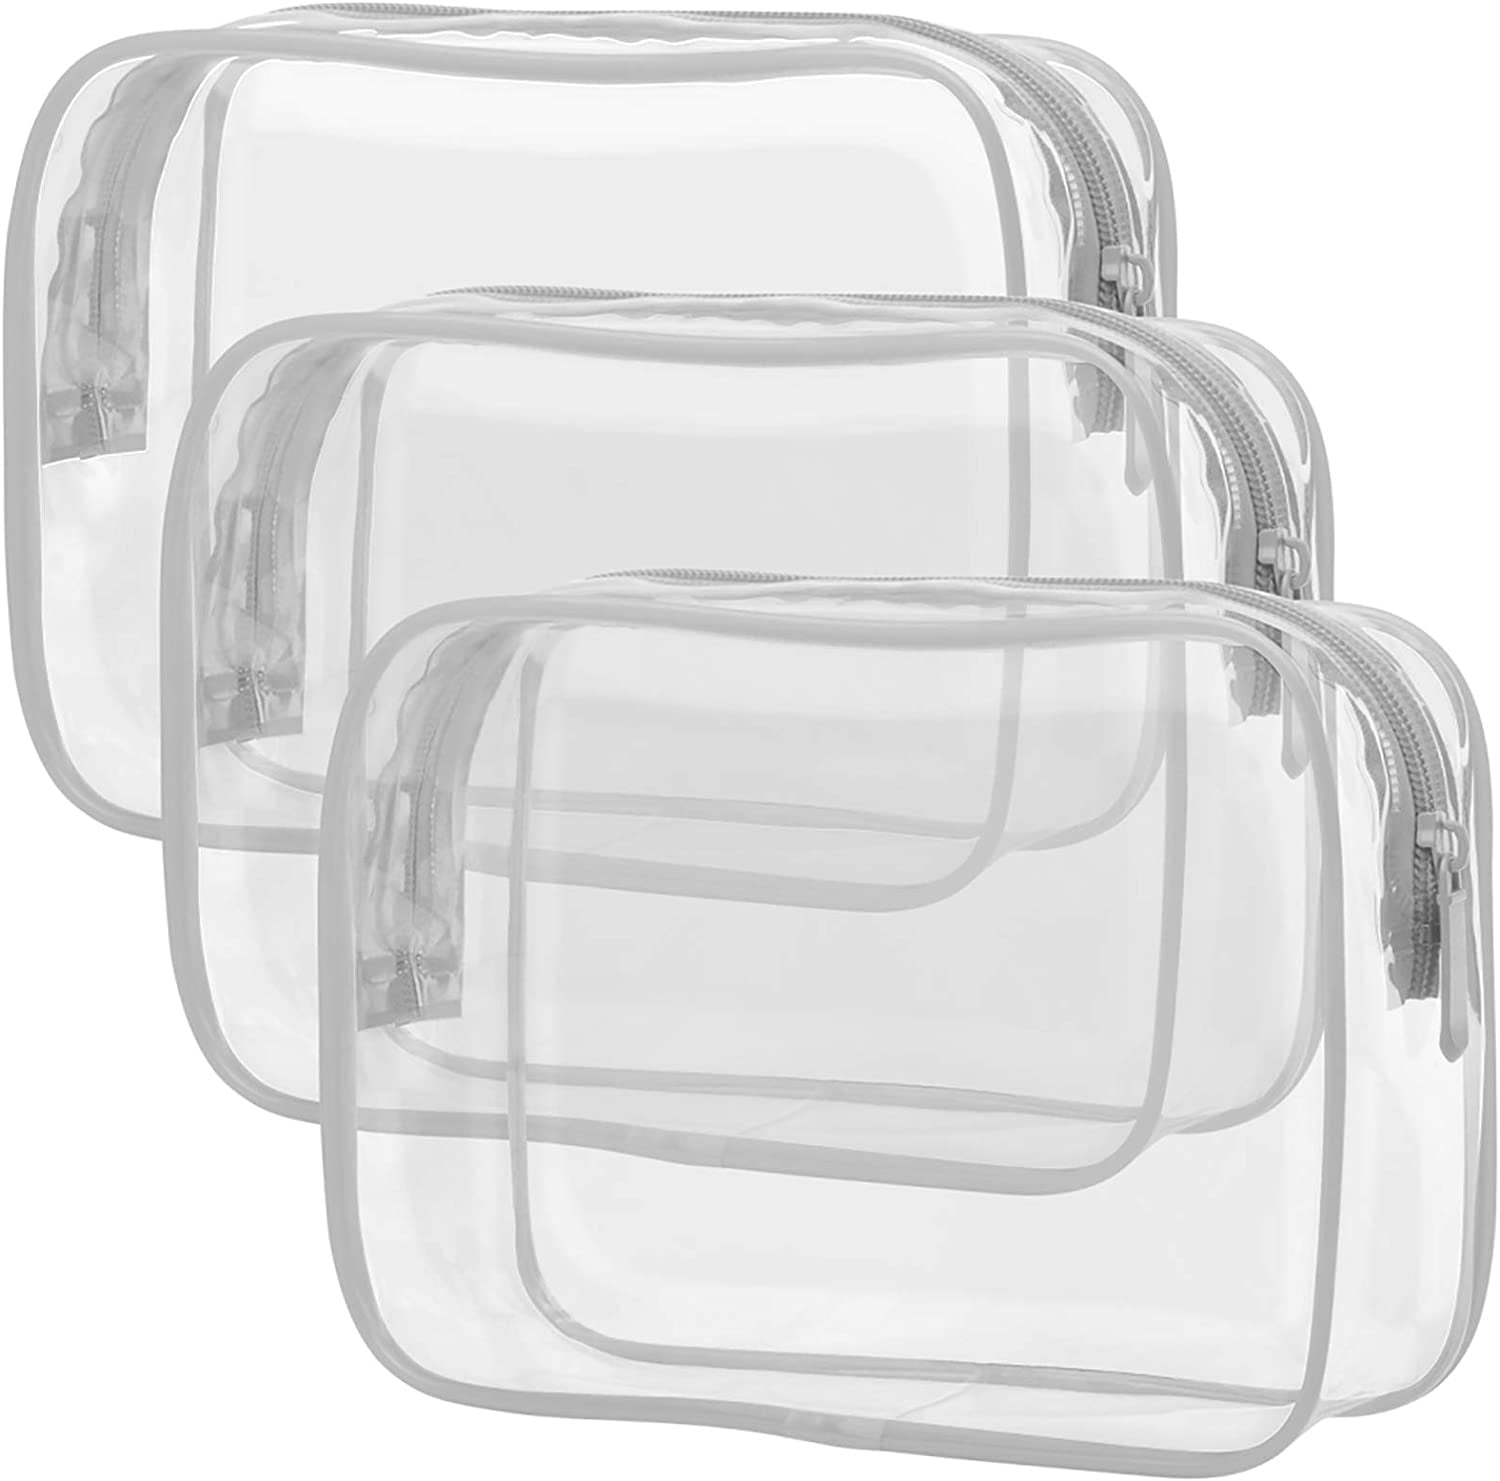 3PCS Clear Toiletry Bag - Toiletry Bags - Quart Size Travel Bag, Clear ...